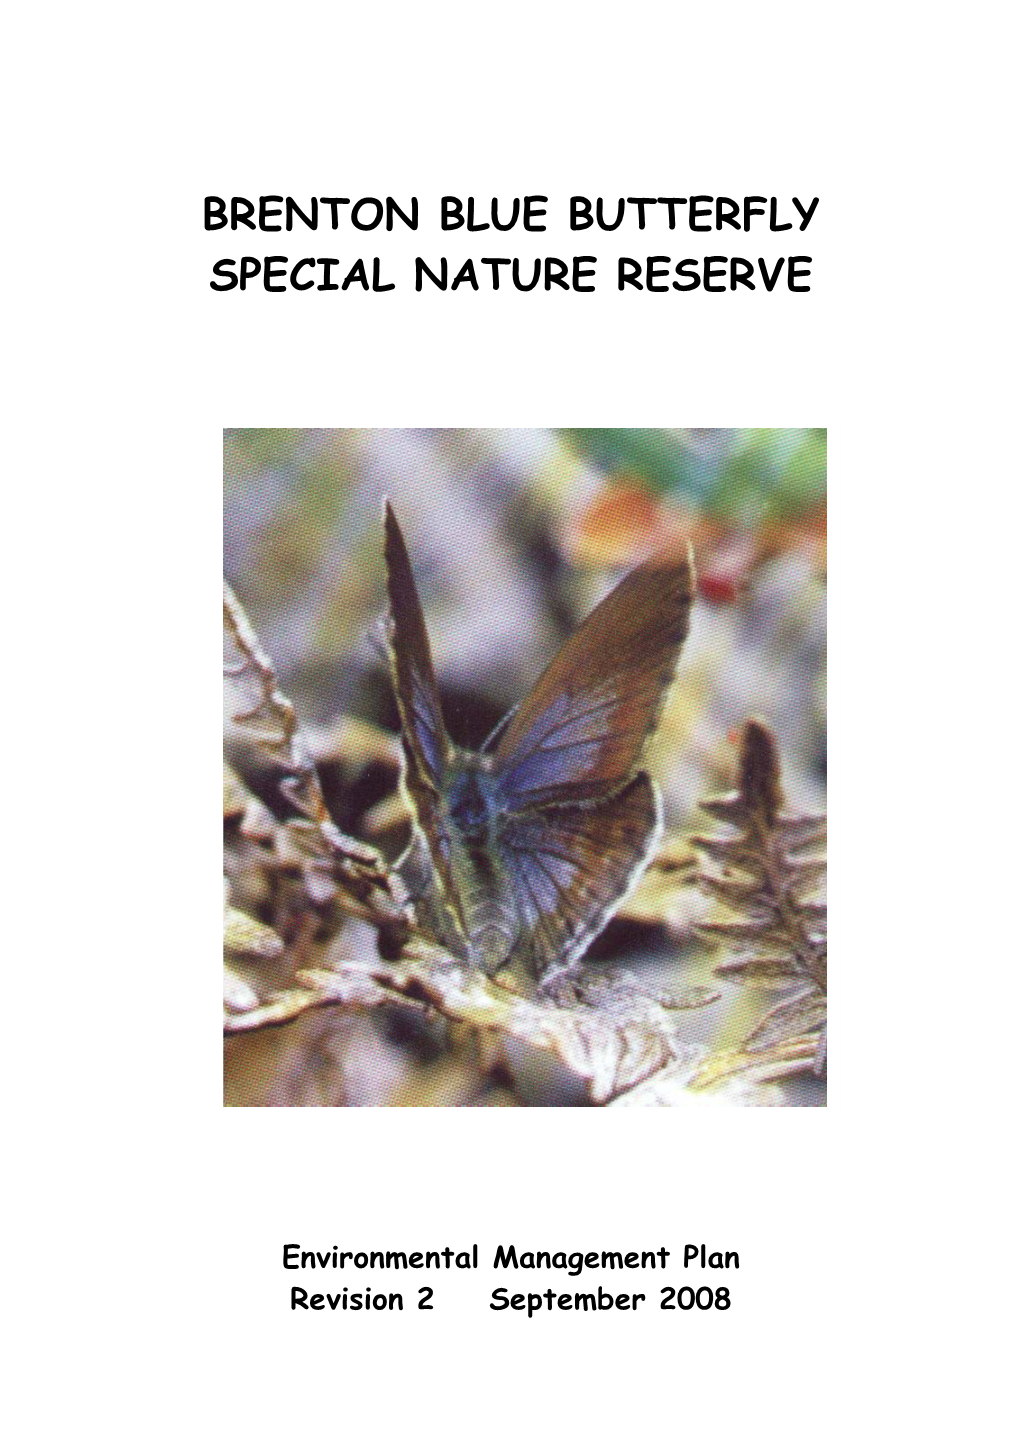 2008 Brenton Blue Butterfly Special Nature Reserve Environmental Management Plan